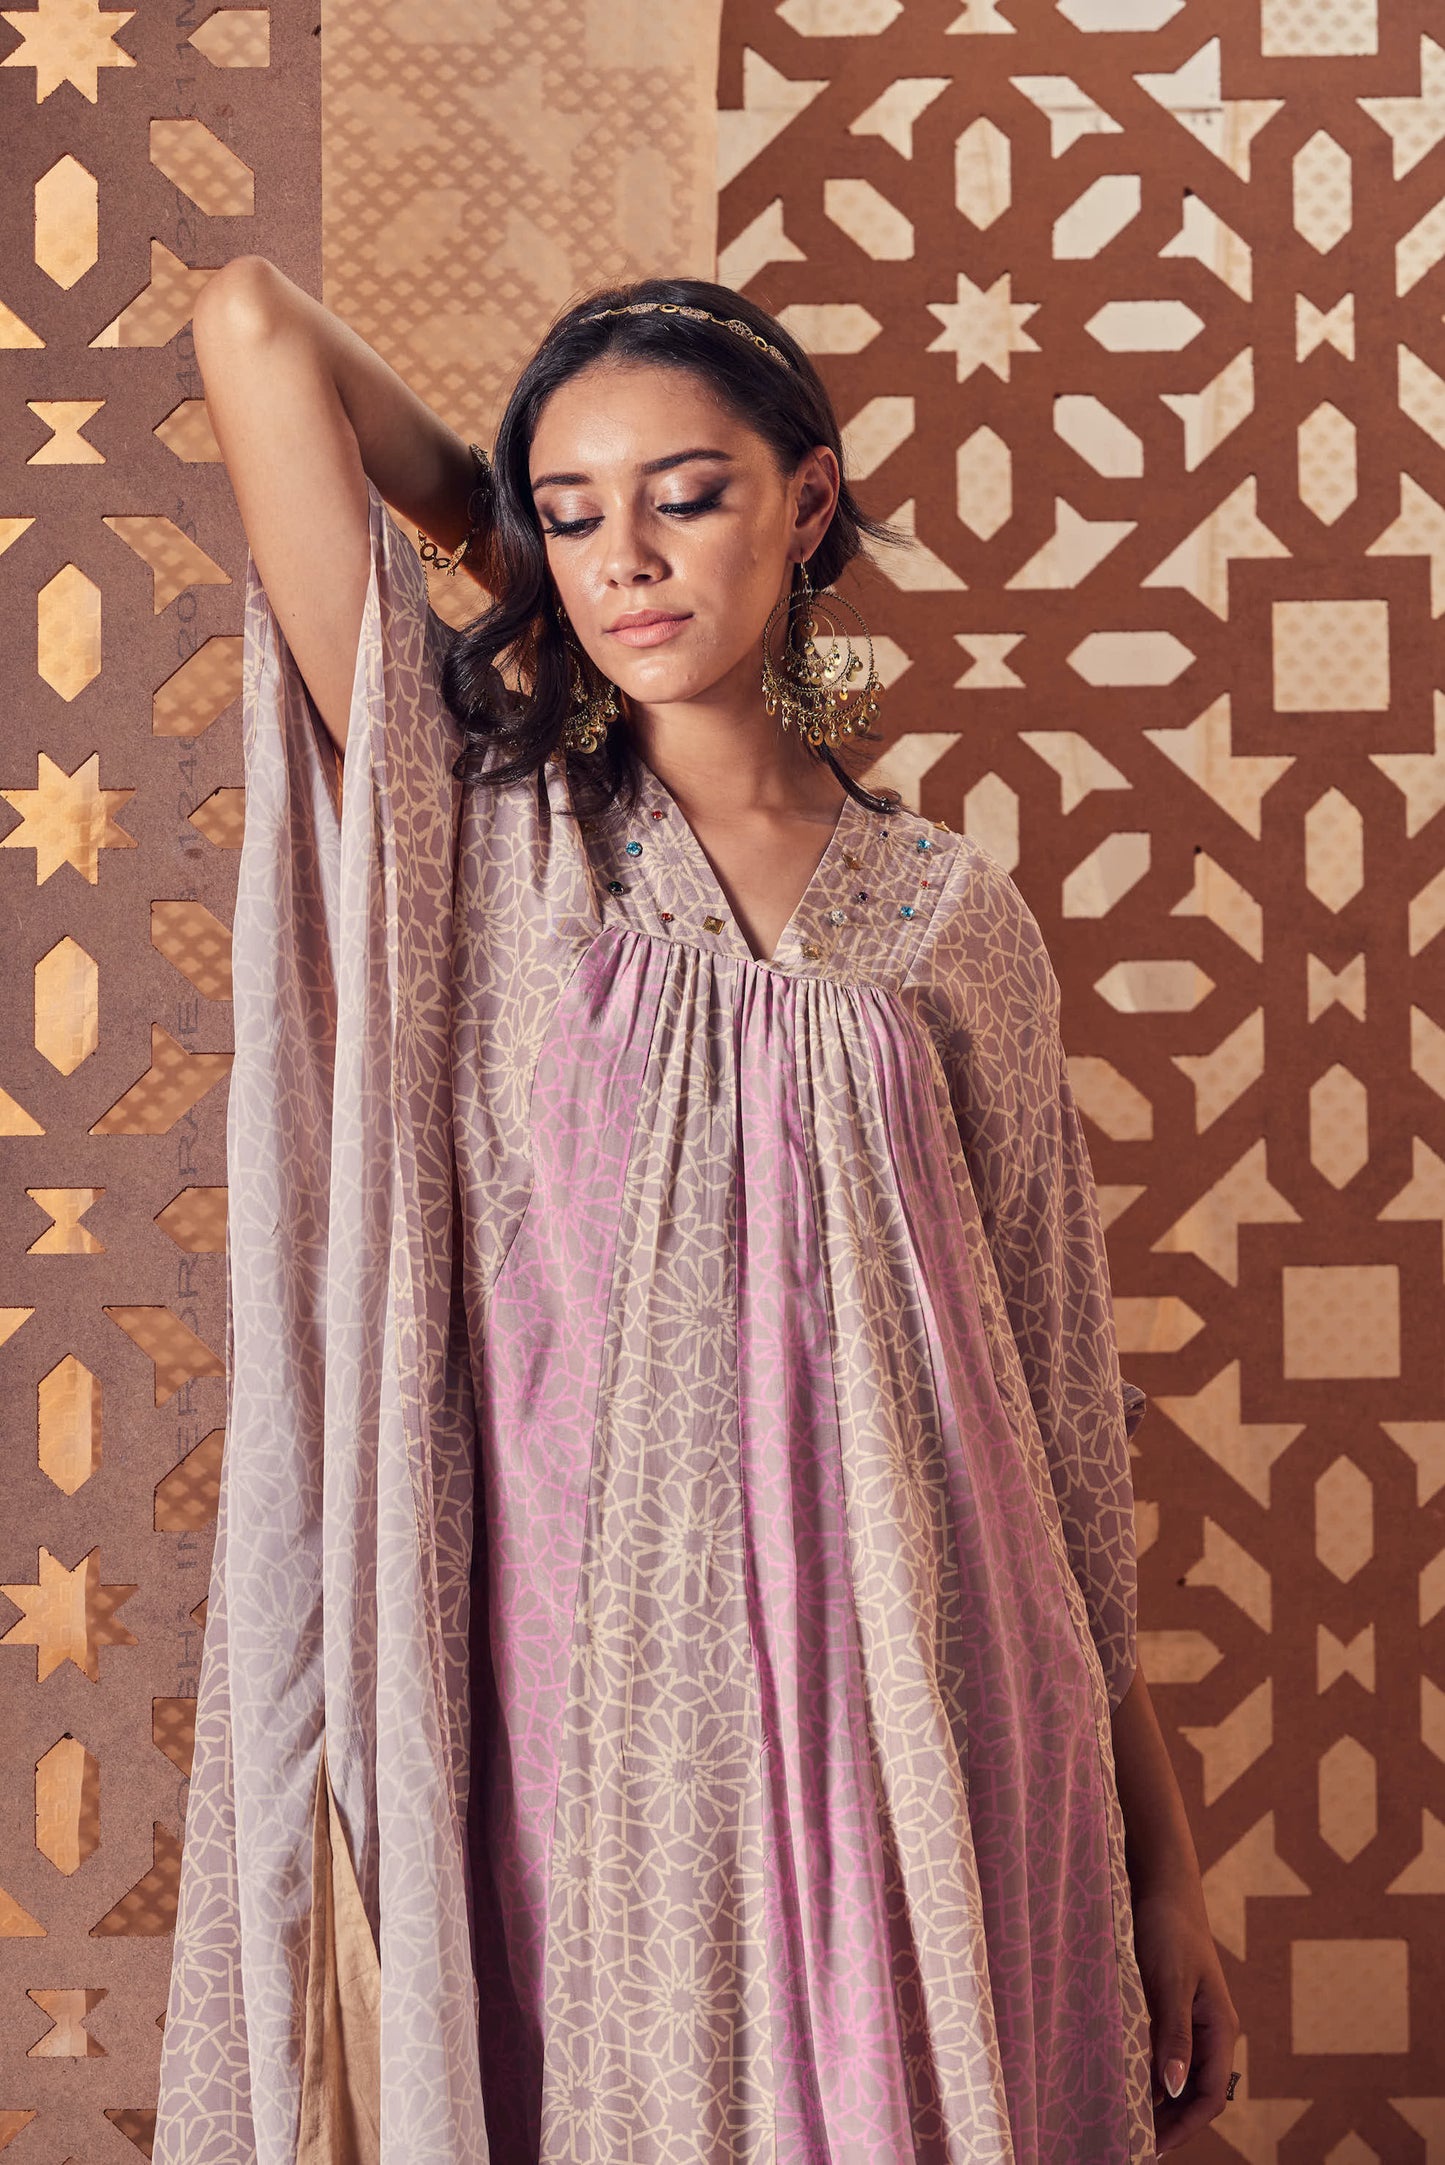 Pink Printed Kaftan by Charkhee with Best Selling, Cotton, Crepe, Embroidered, Ethnic Wear, Kaftan Dresses, Kaftans, Maxi Dresses, Naayaab, Natural, Nayaab, Nayaab by Charkhee, Pink, Relaxed Fit, Womenswear at Kamakhyaa for sustainable fashion